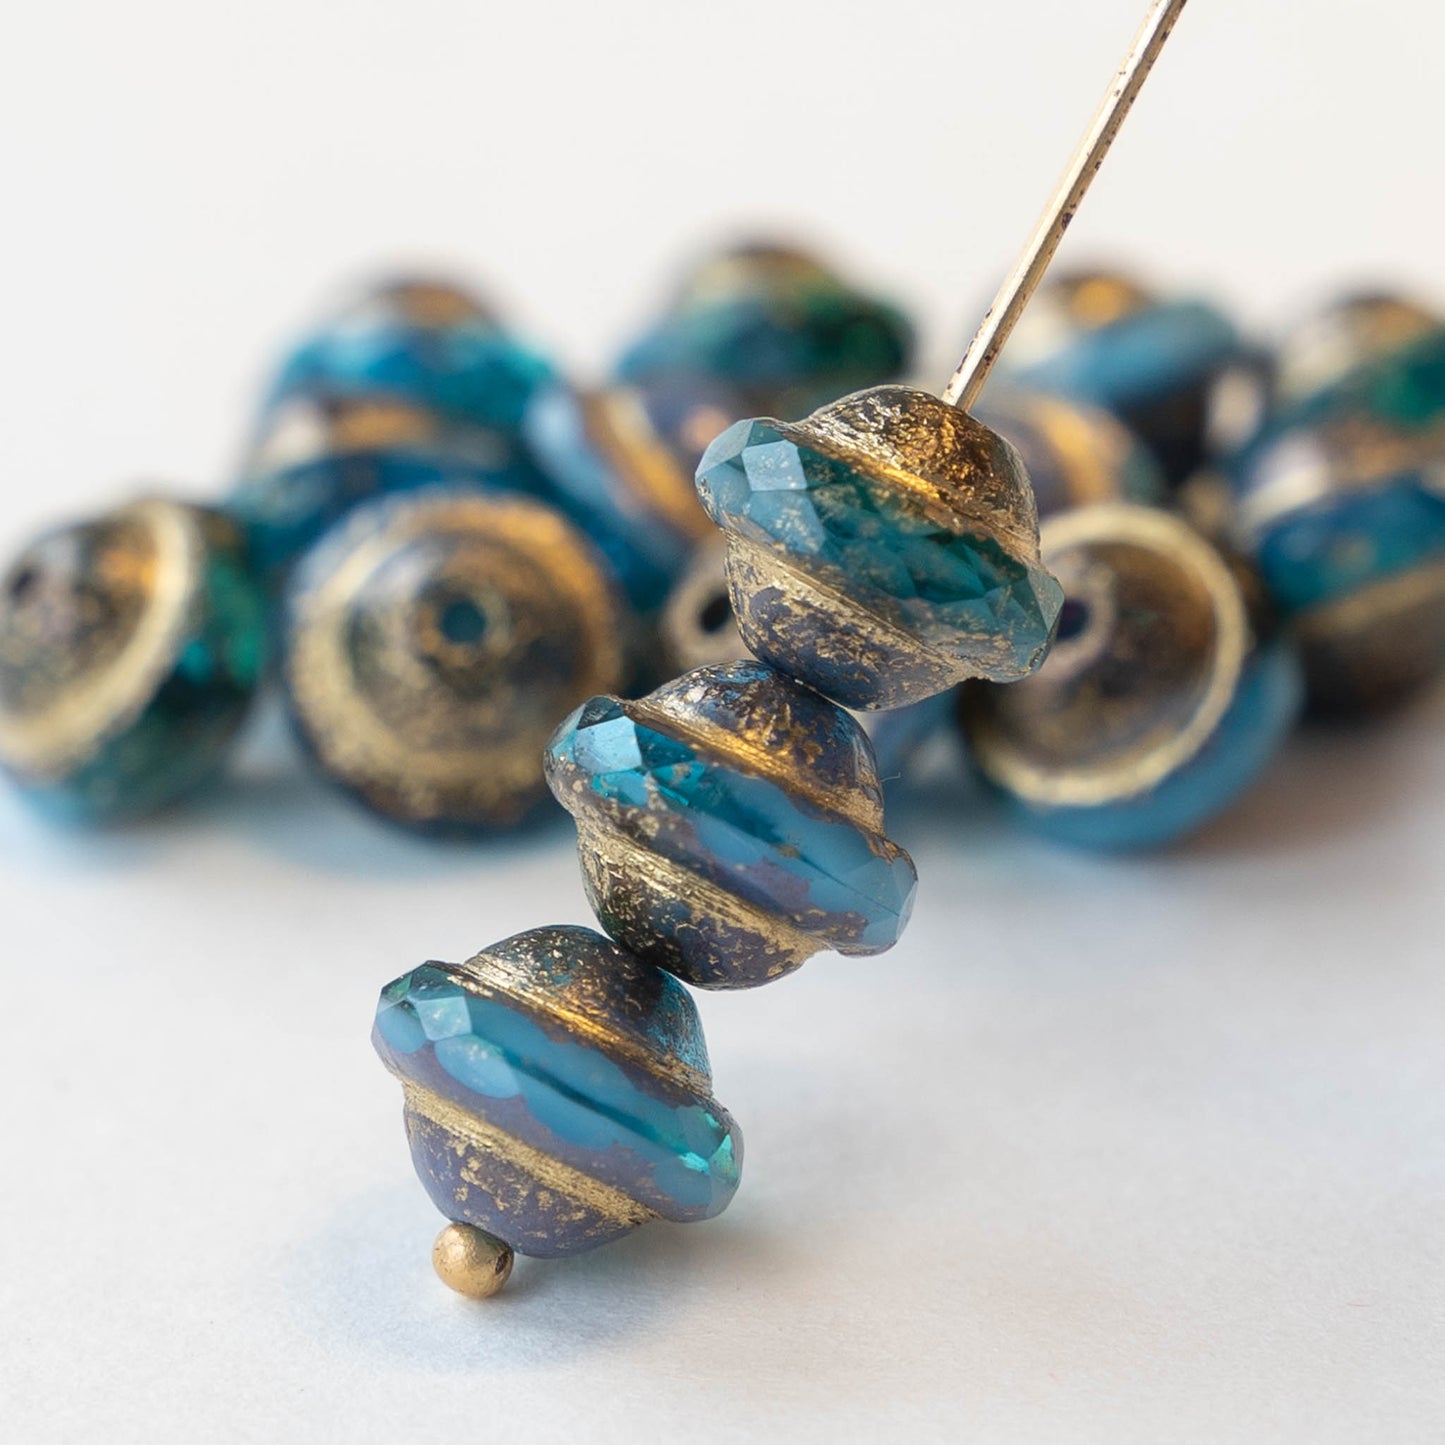 8x10mm Saturn Beads - Blue Mix Picasso Beads - 15 Beads